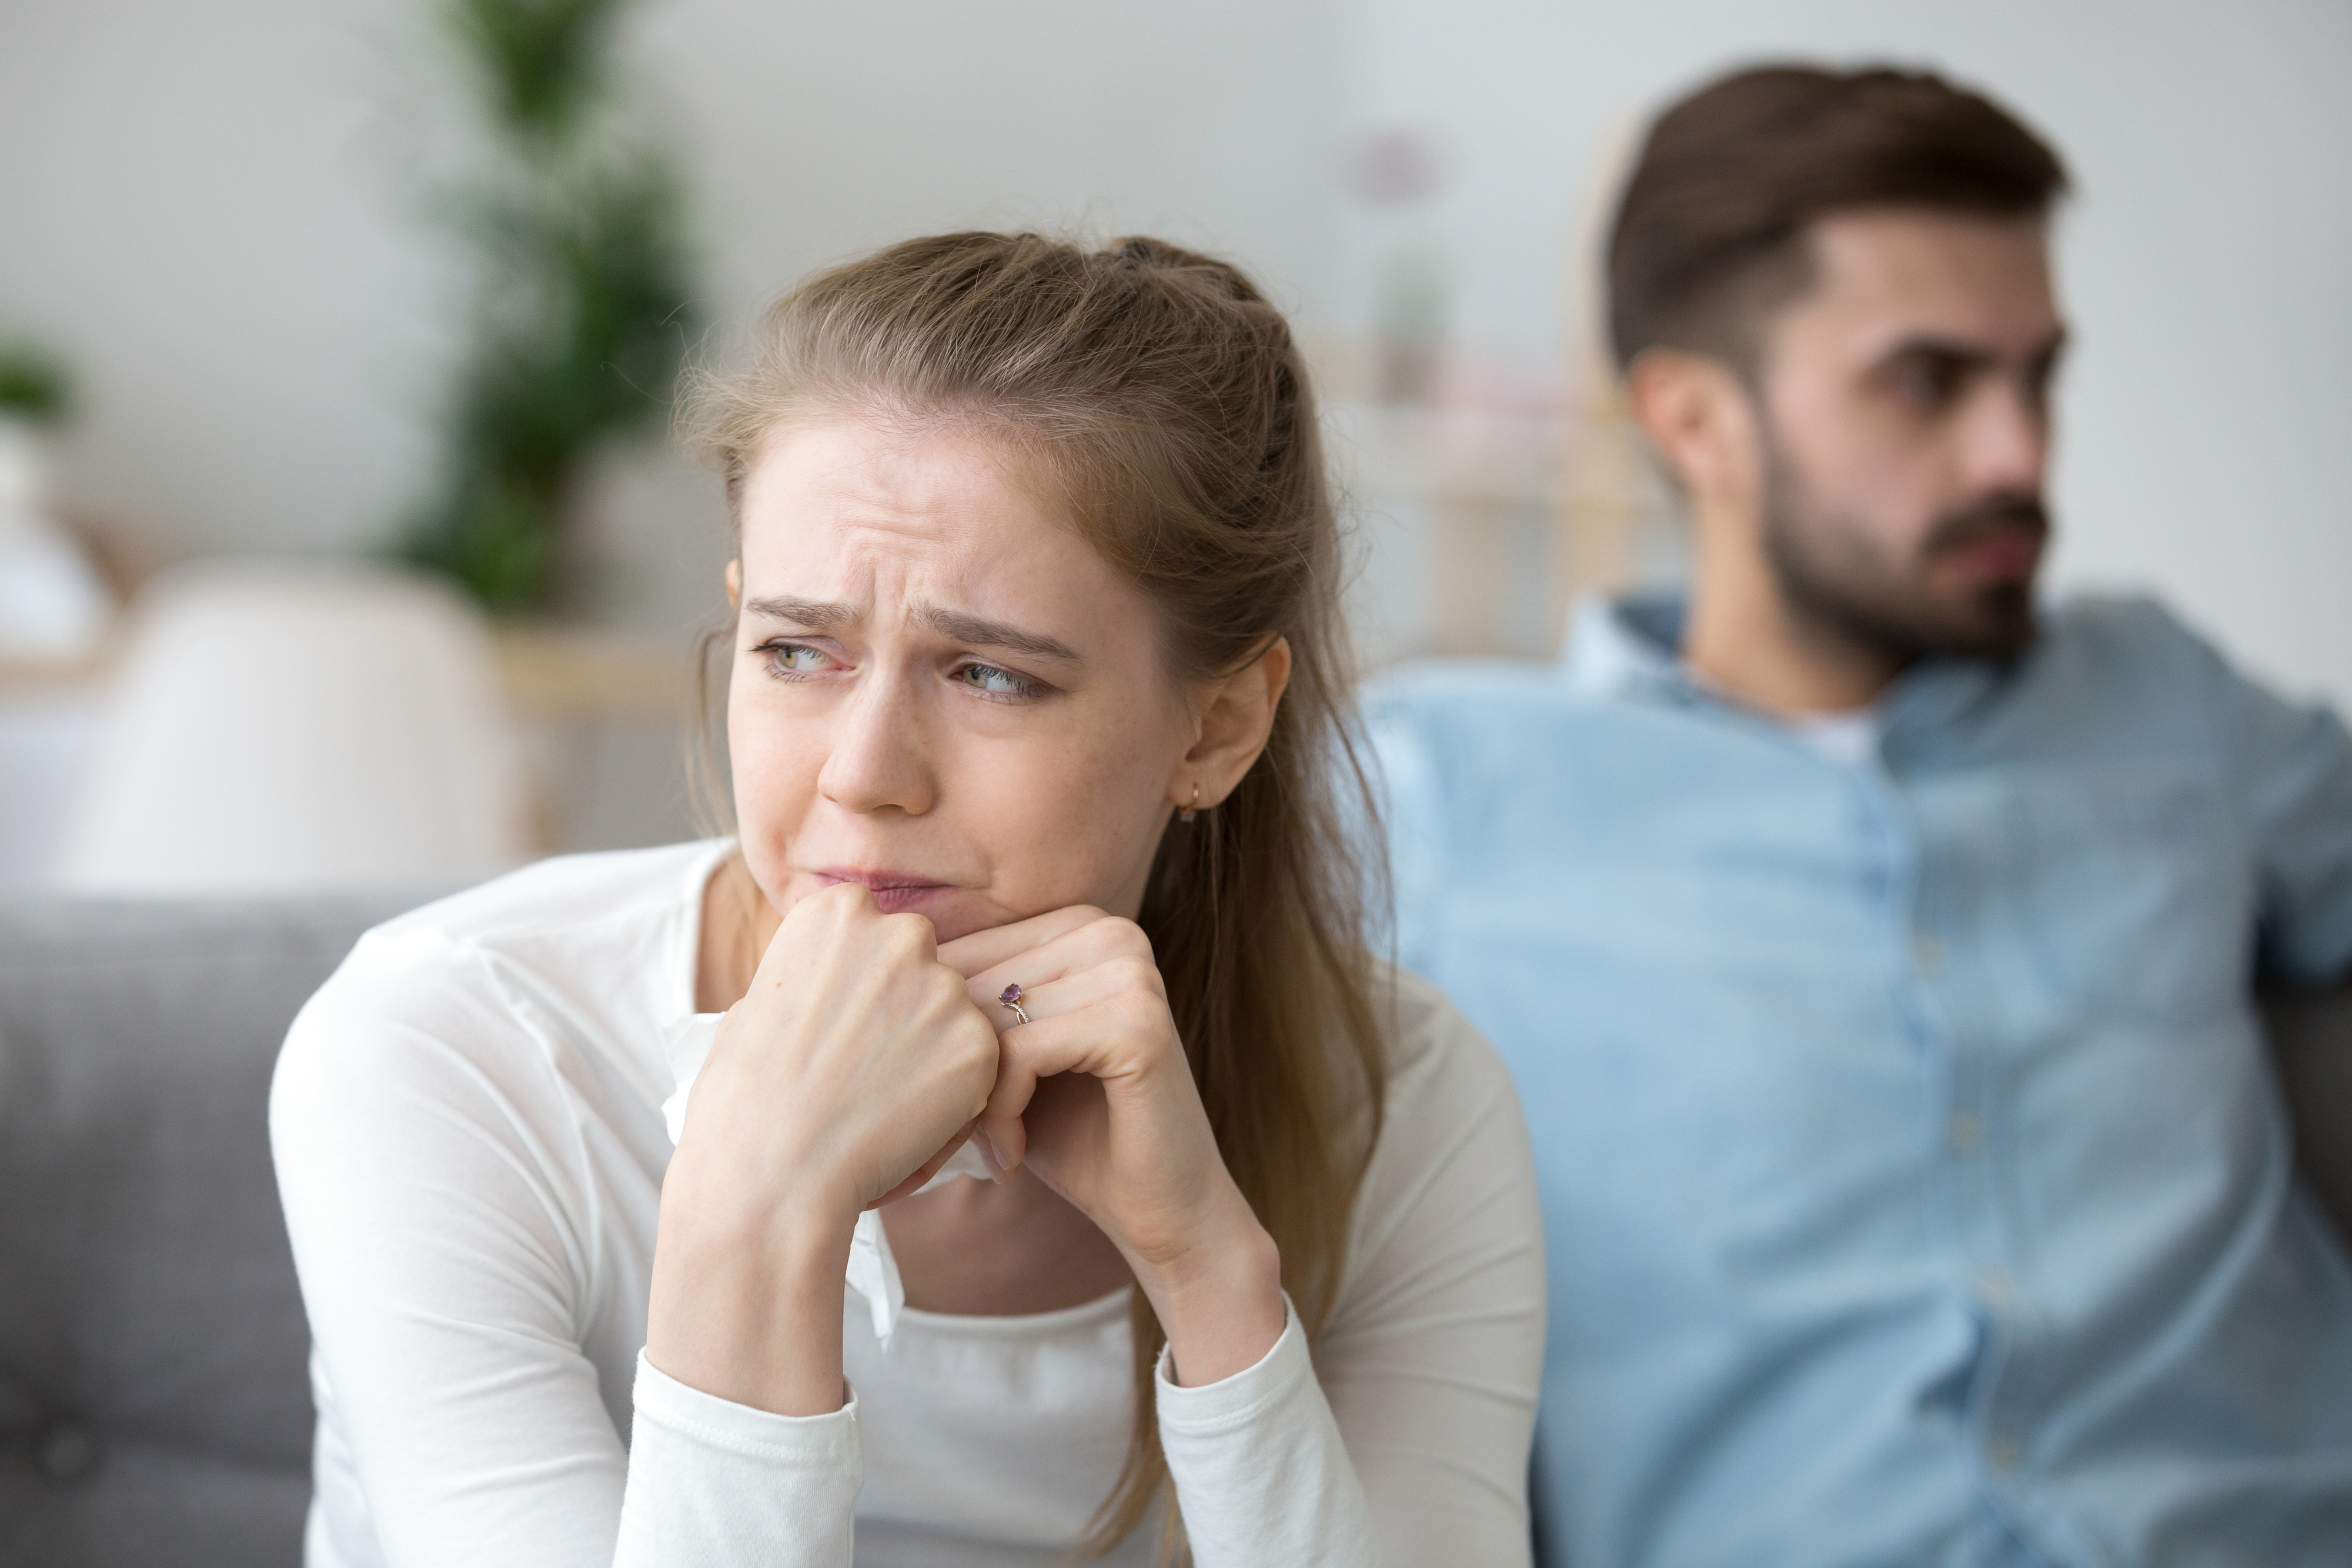 Woman looks anxious, man sits behind her with a blurred background. They appear to be in a disagreement or a stressful situation